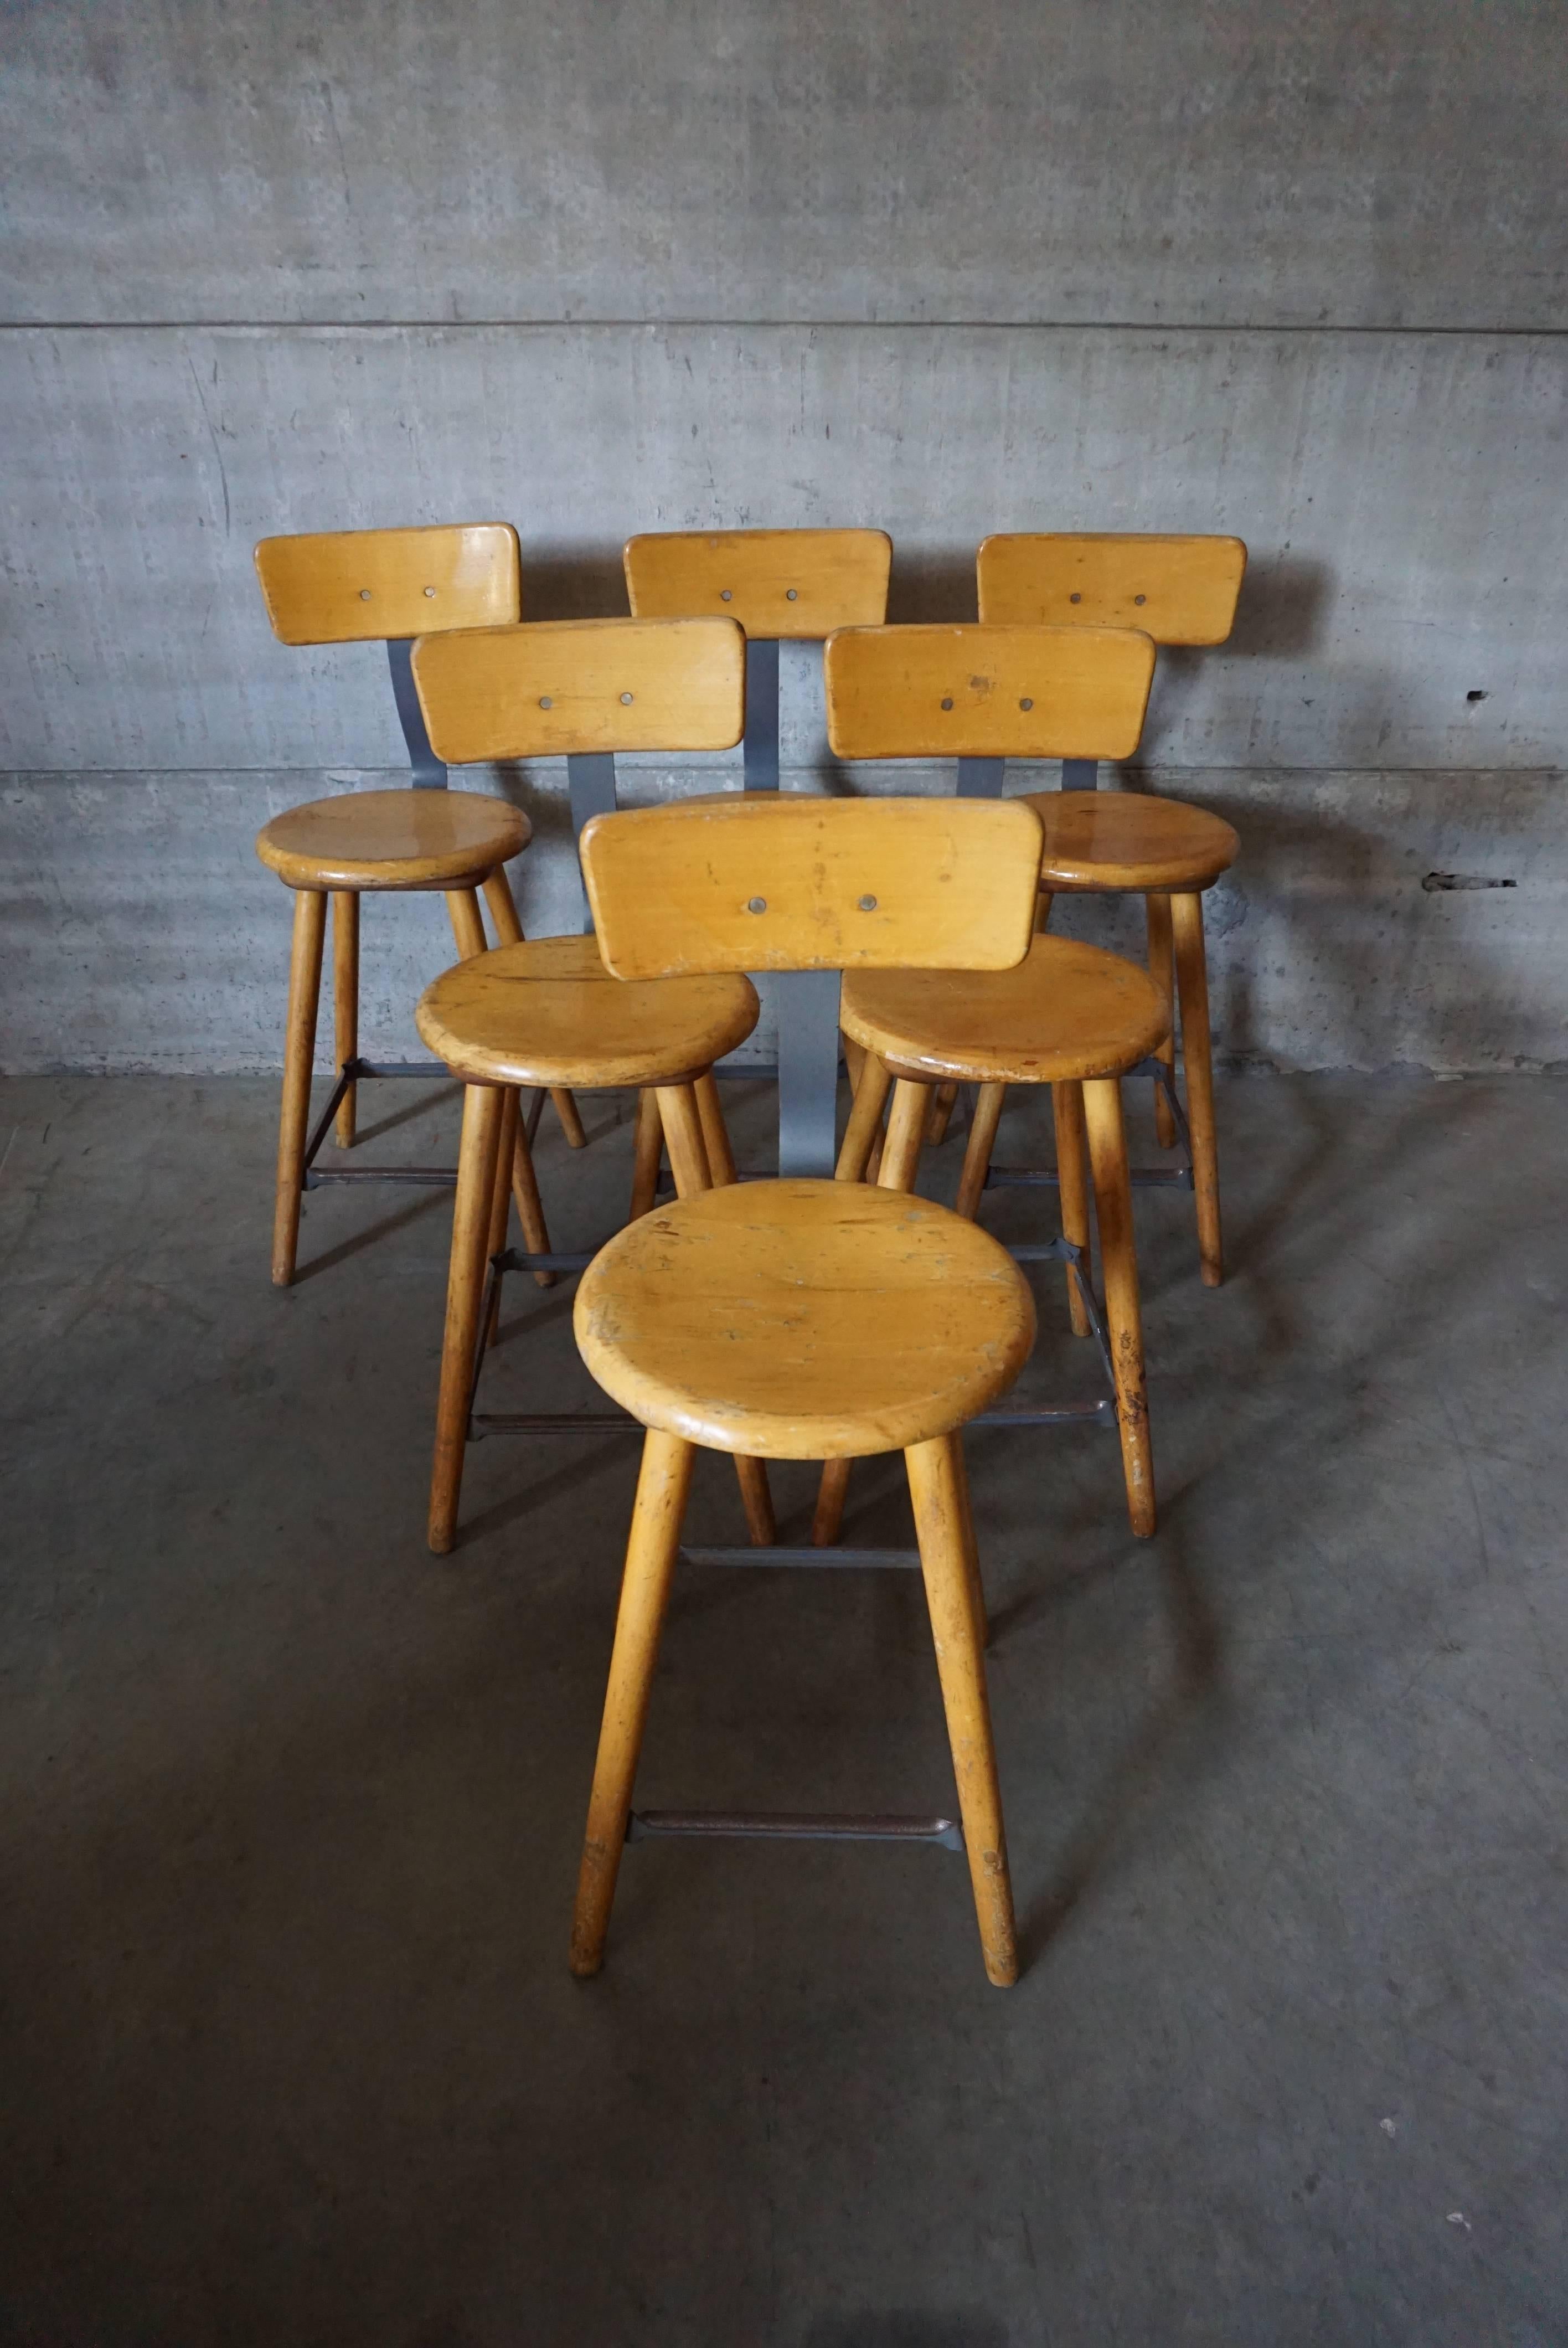 This workshop stool was made in Germany in the 1950s. It features a wooden frame, seat and backrest. It can be used as a bar stool.